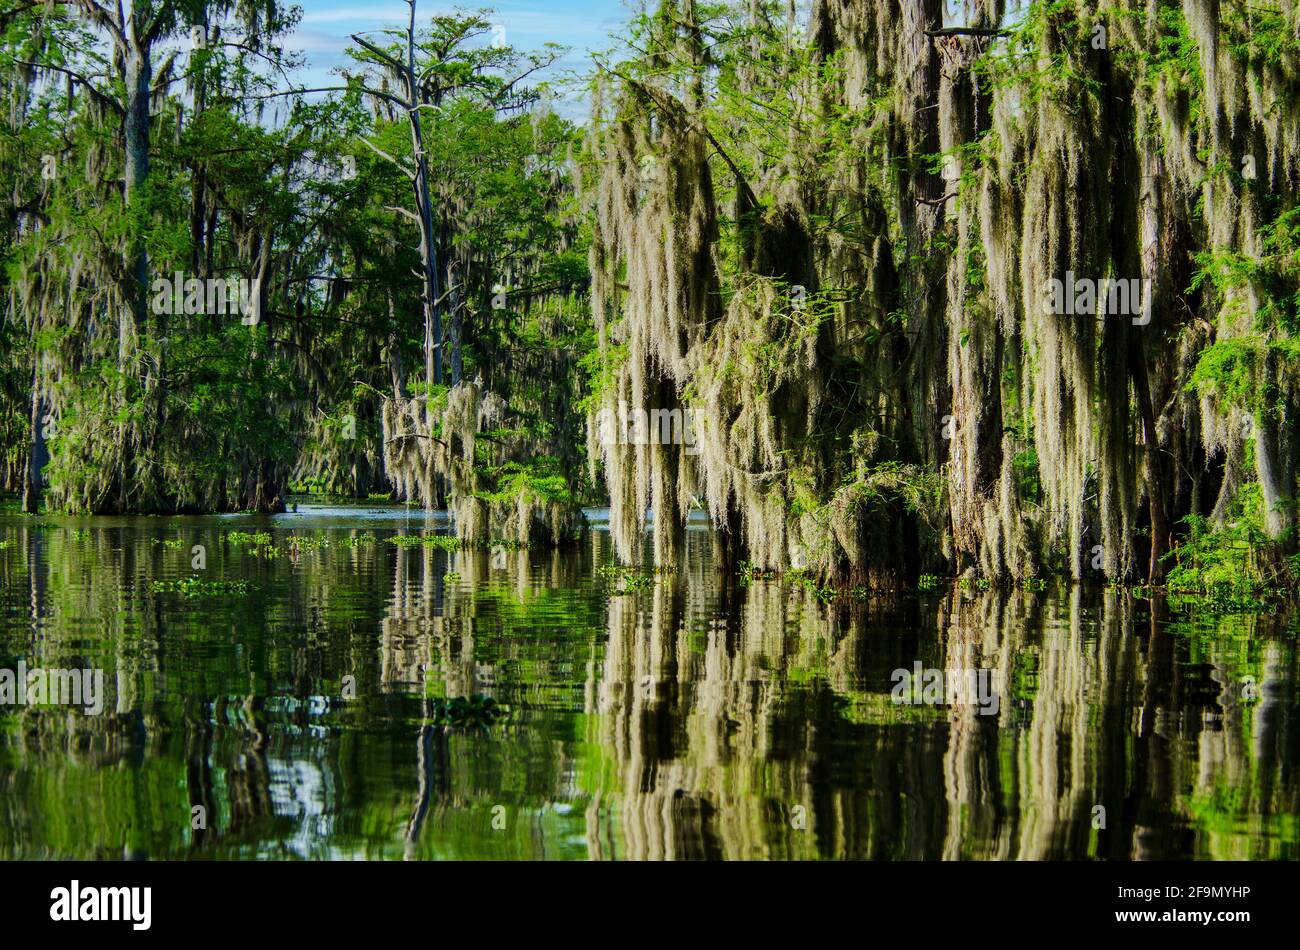 Atchafalaya swamp with bald cypress  trees, Taxodium distichum, with Spanish Moss, Tillandsia usneoides, hanging from the branches. Louisiana, USA. Stock Photo